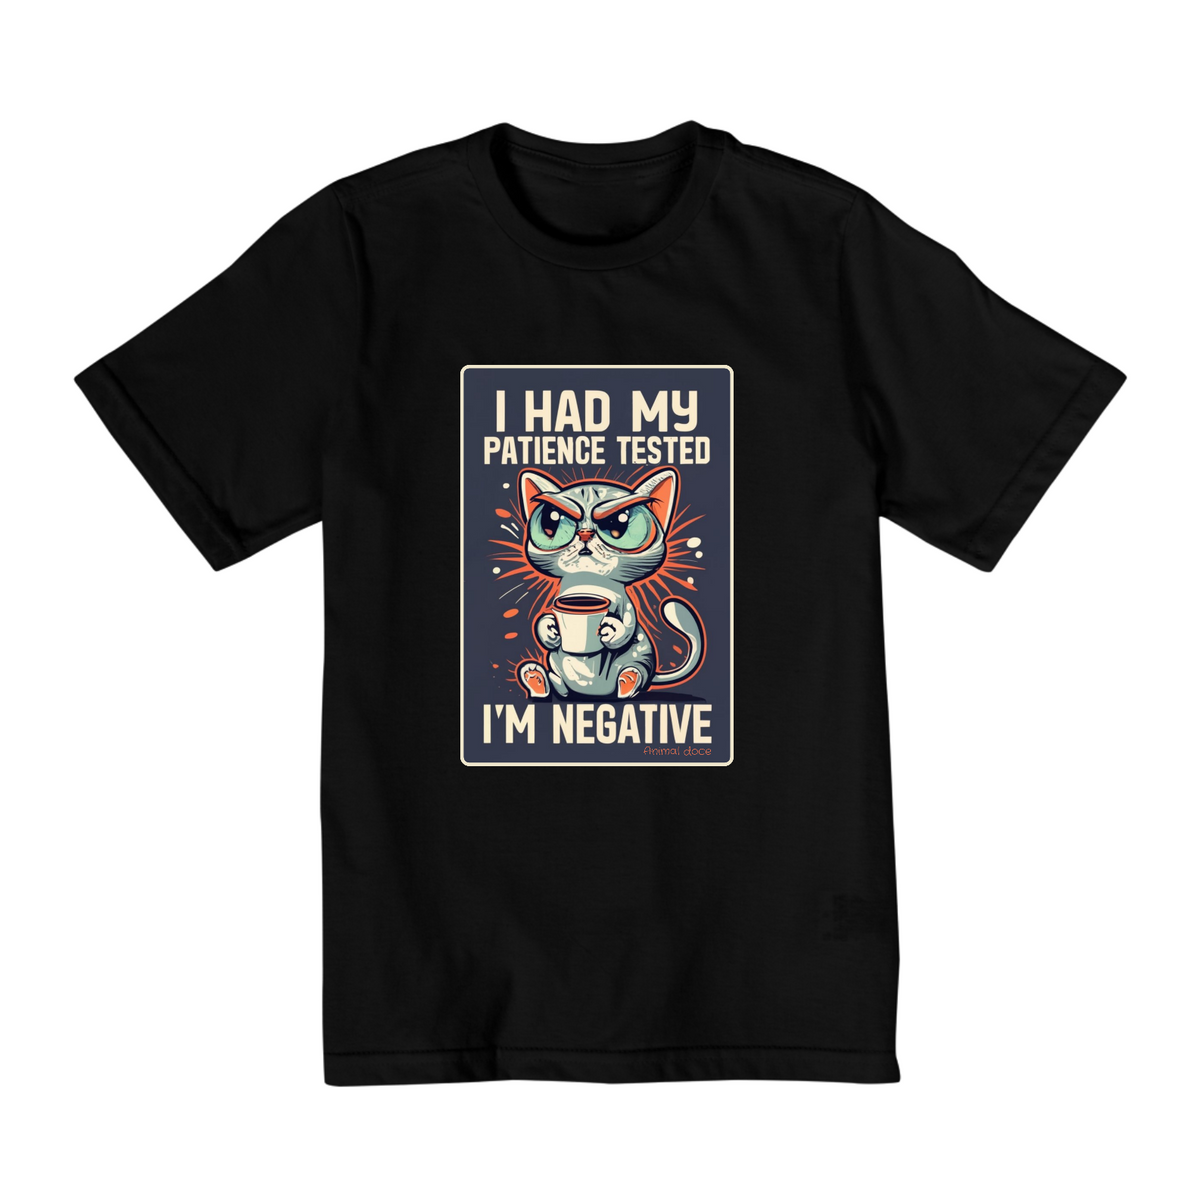 Nome do produto: CAMISETA QUALITY INFANTIL CAT, I HAD MY PATIENCE TESTED-10 A 14 ANOS